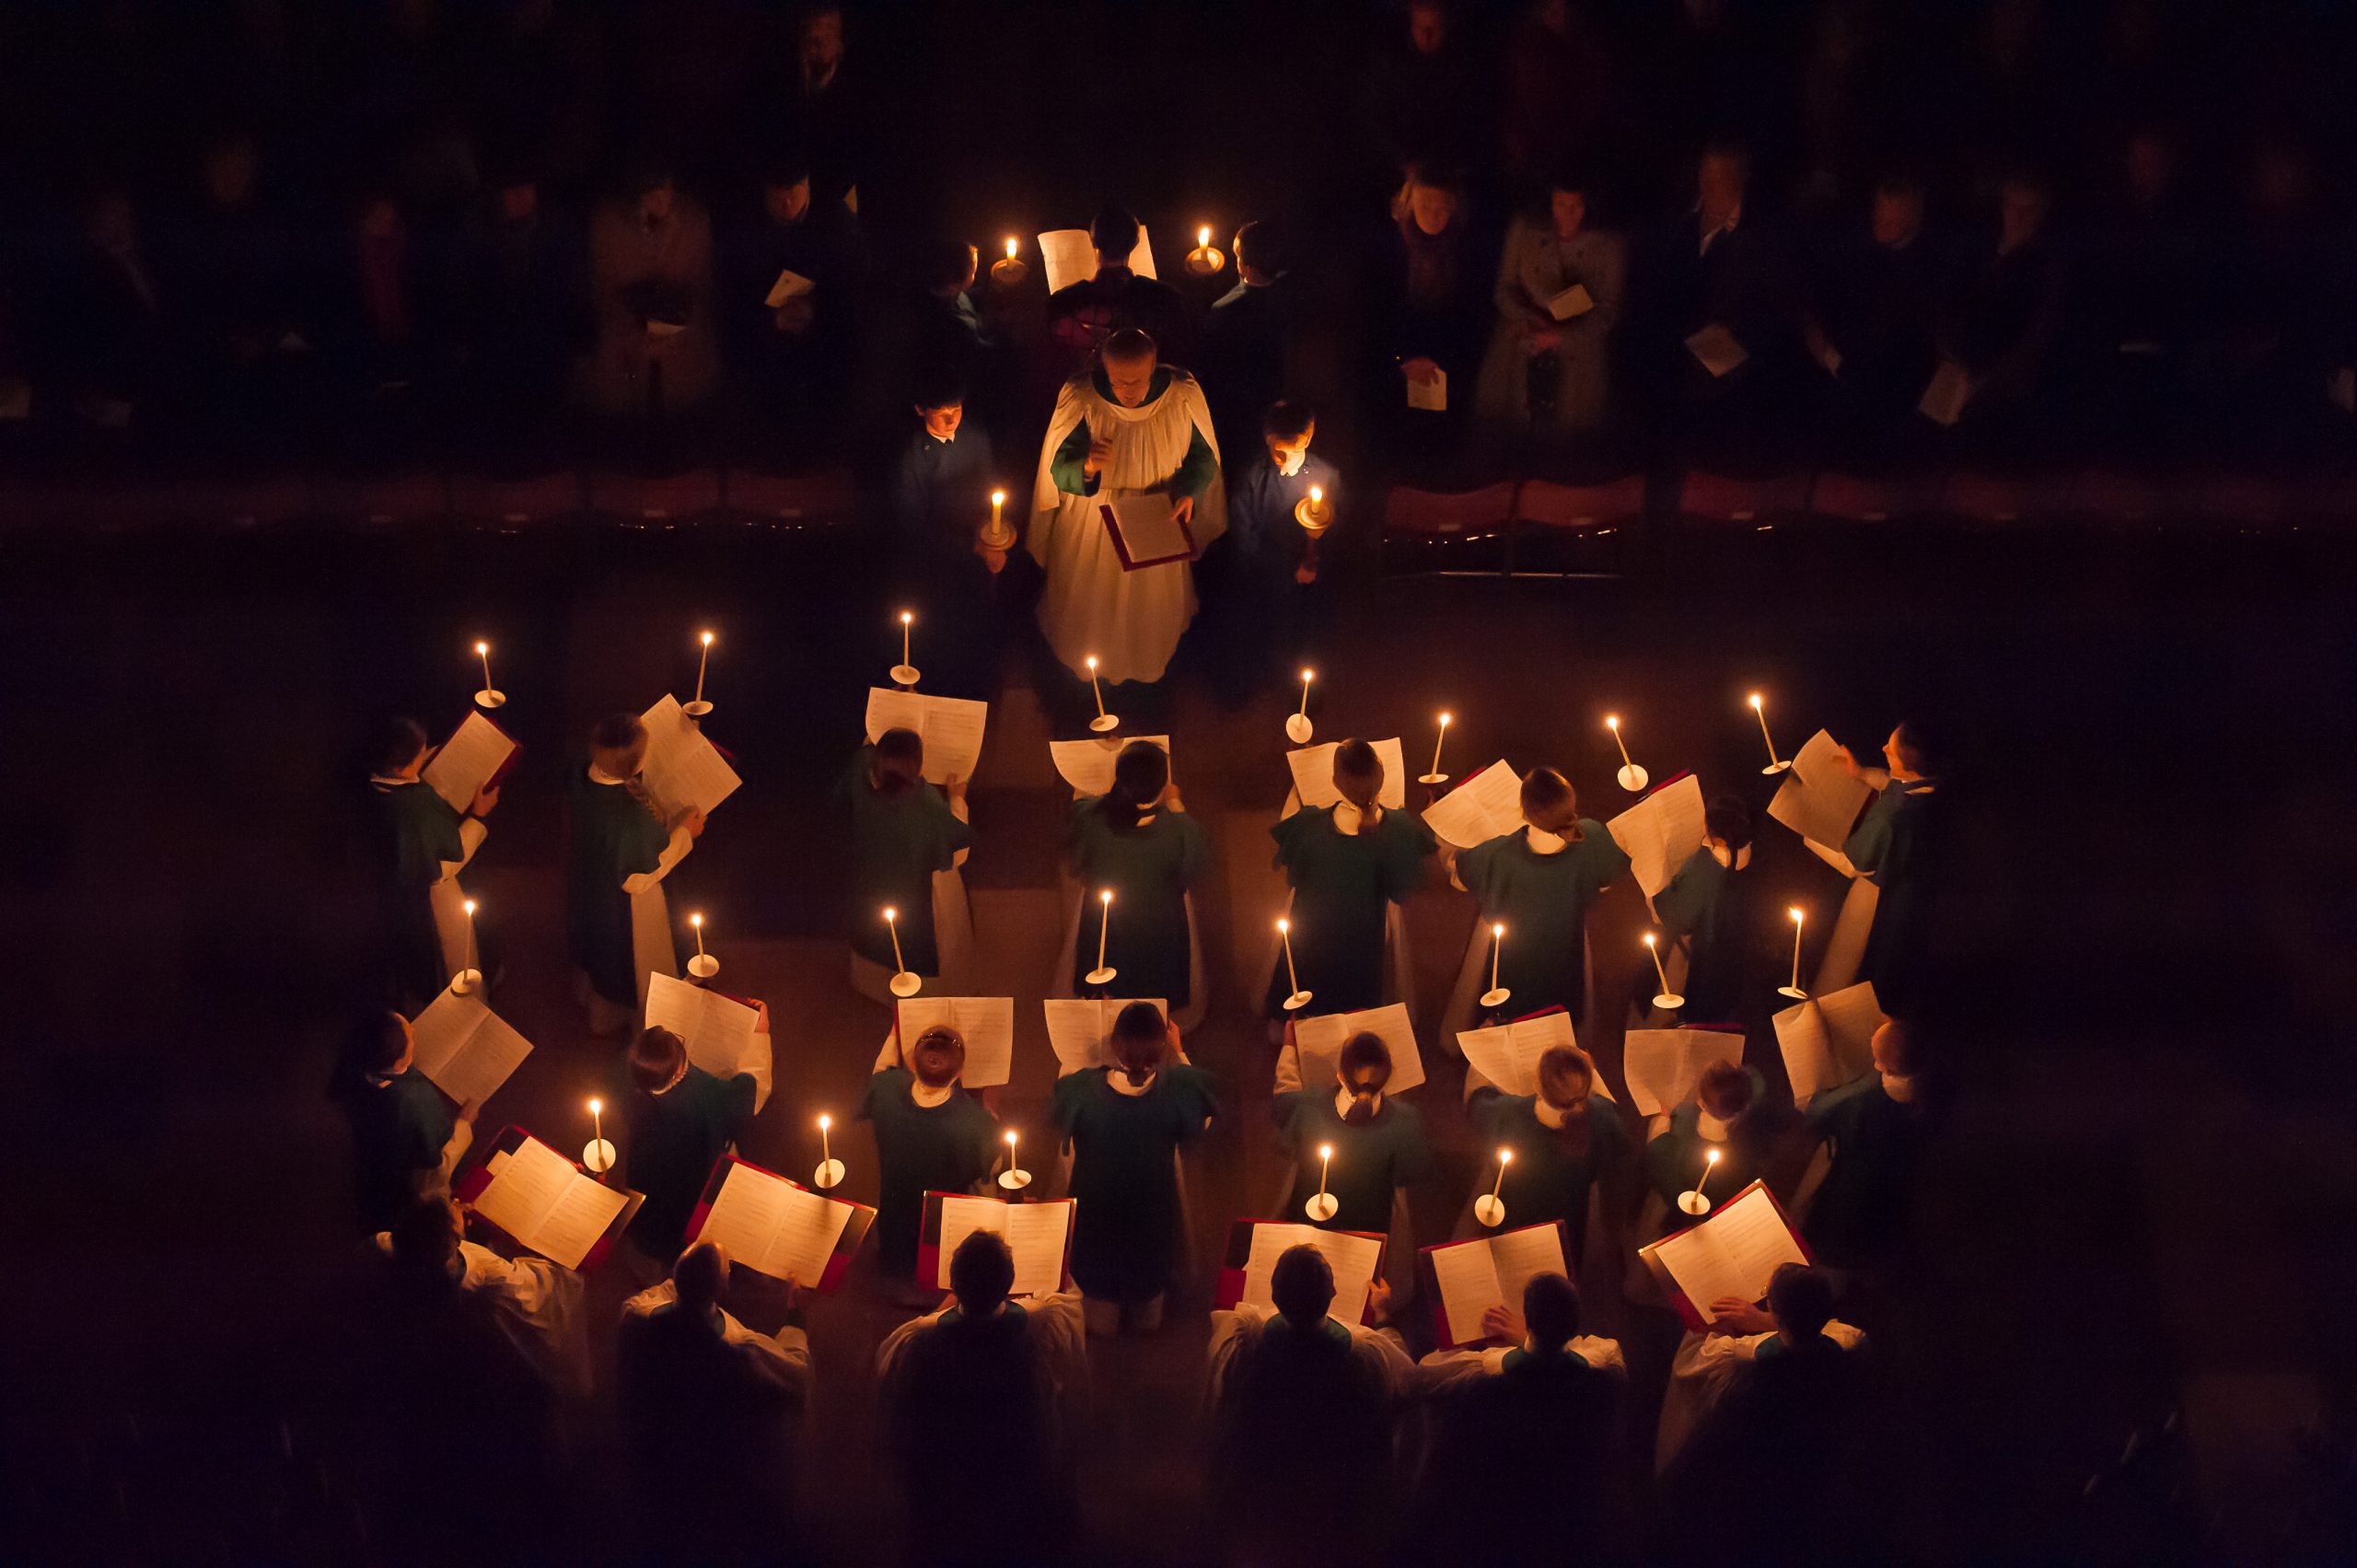 From Darkness to Light: The Advent Procession 2021